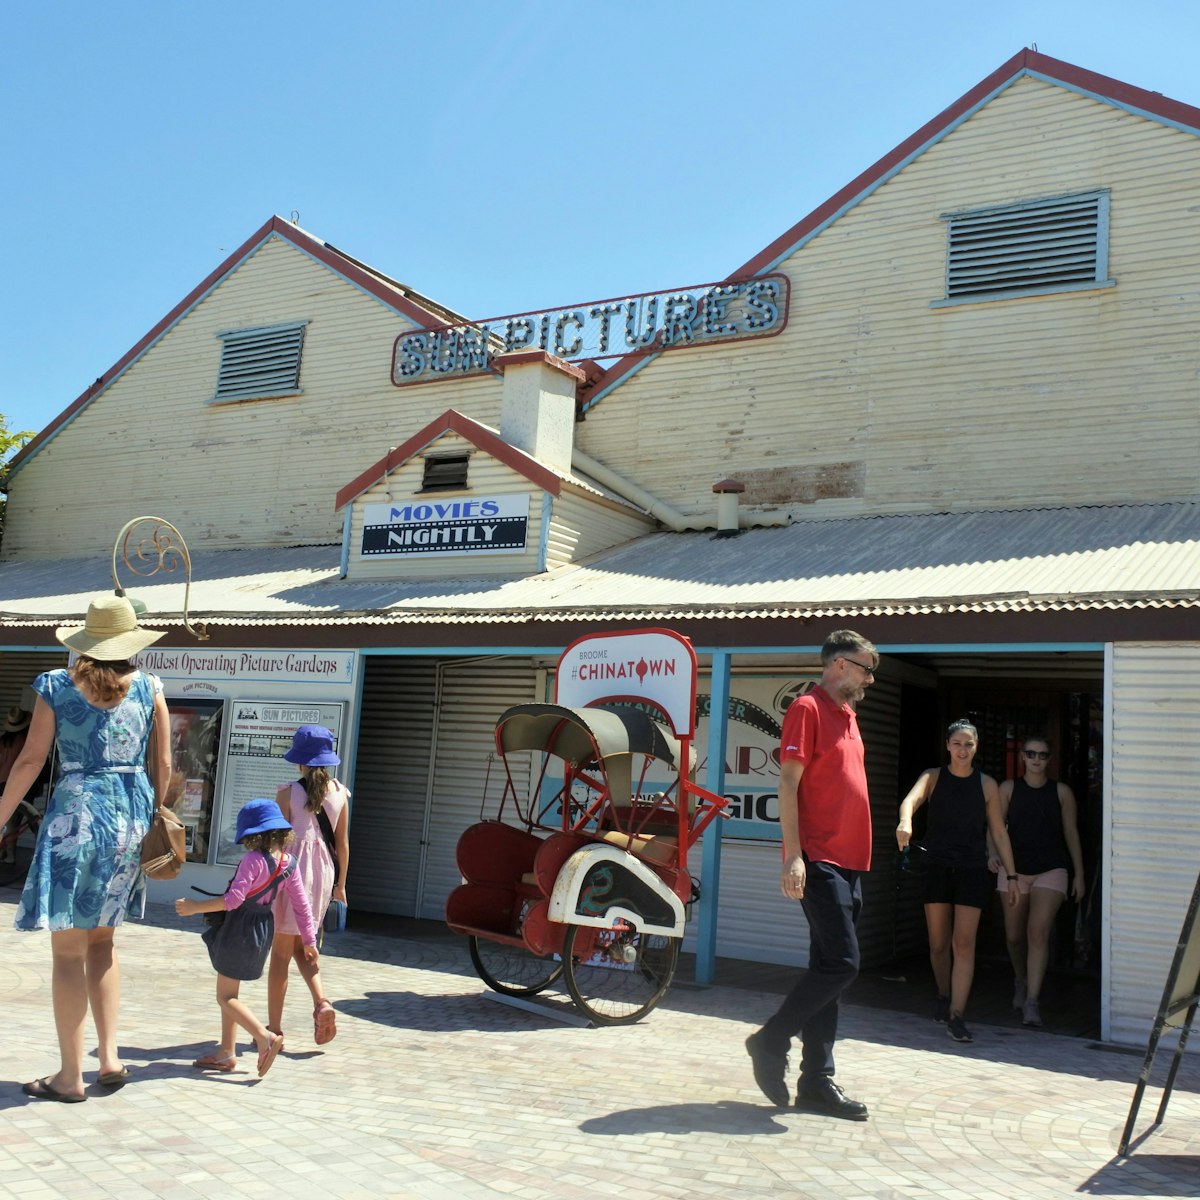 BROOME, WA Australia - SEP 21 2019: Visitors at Sun Pictures Cinema, world's longest-running outdoor cinema, built in 1913, screening new releases in a charming setting.; Shutterstock ID 1510757747; your: Bridget Brown; gl: 65050; netsuite: Online Editorial; full: POI Image Update